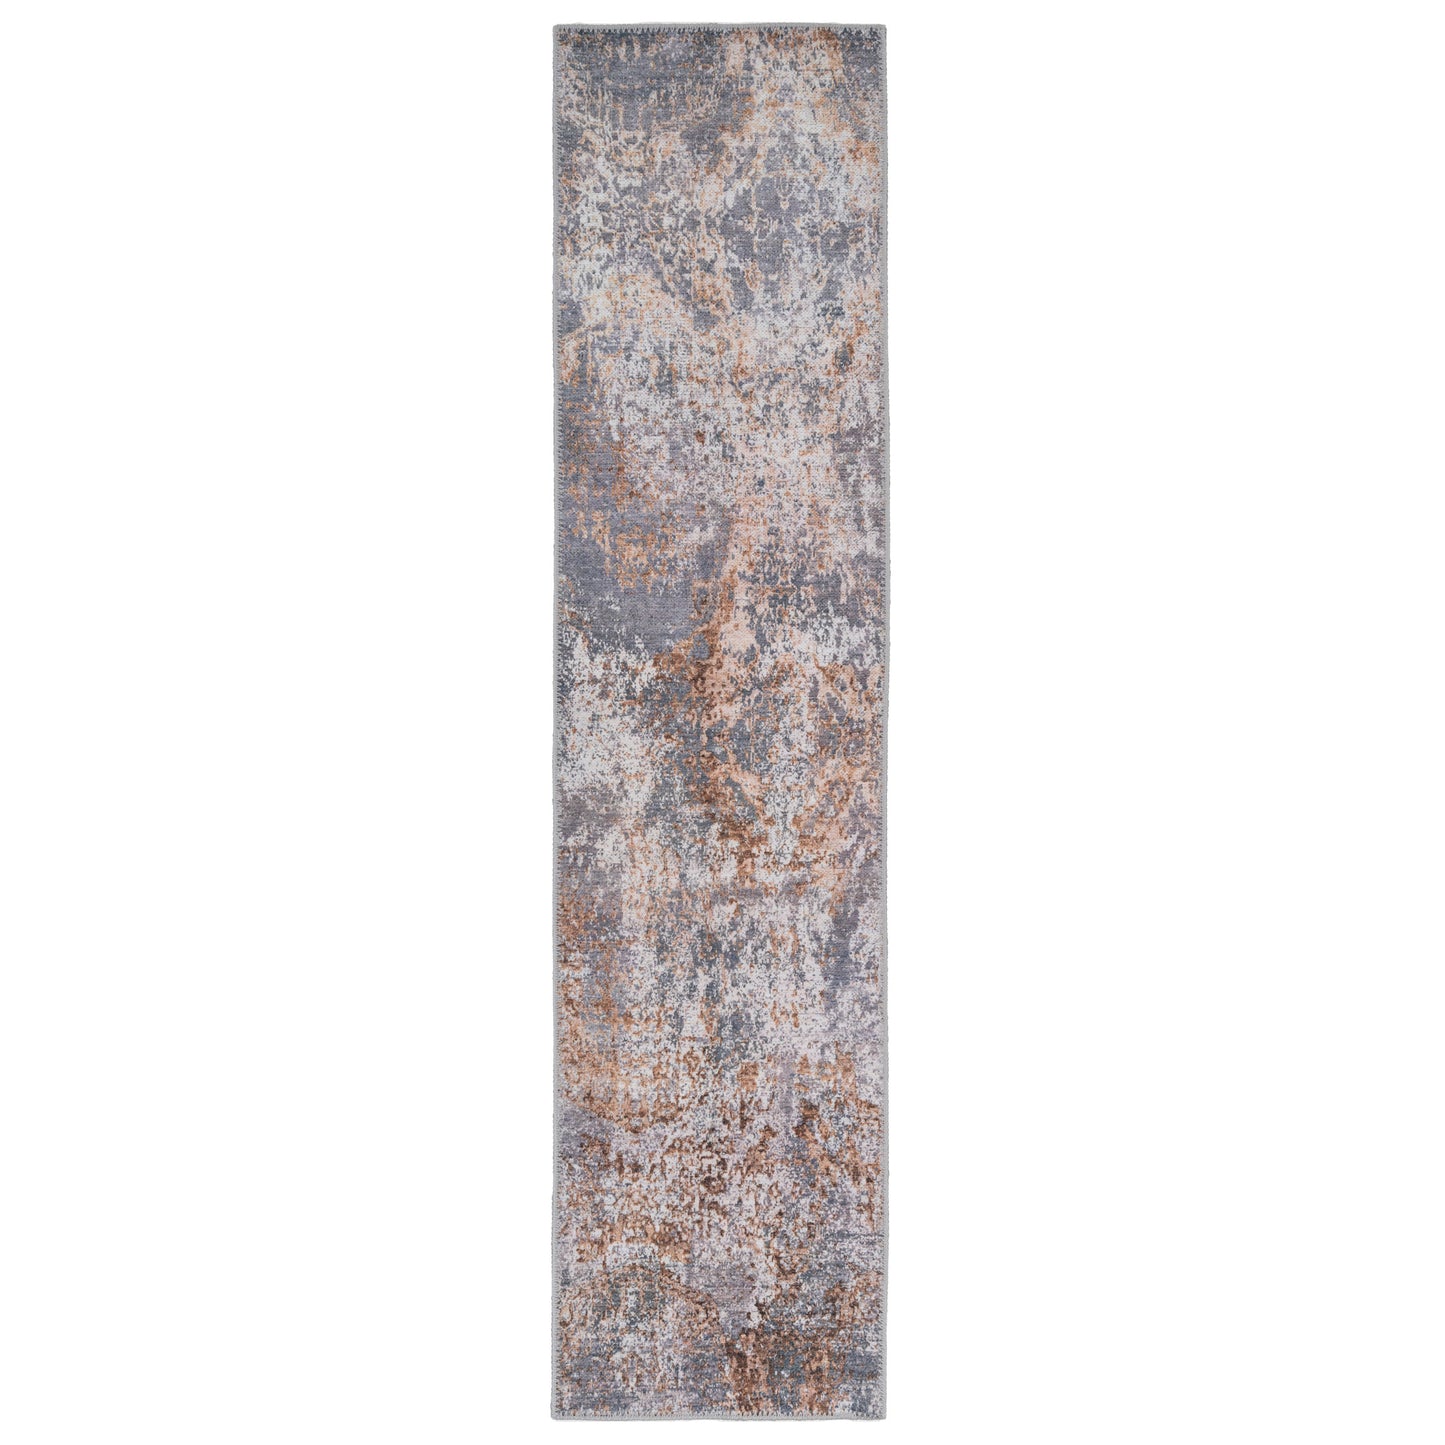 Washable Distressed Copper Blue Rug